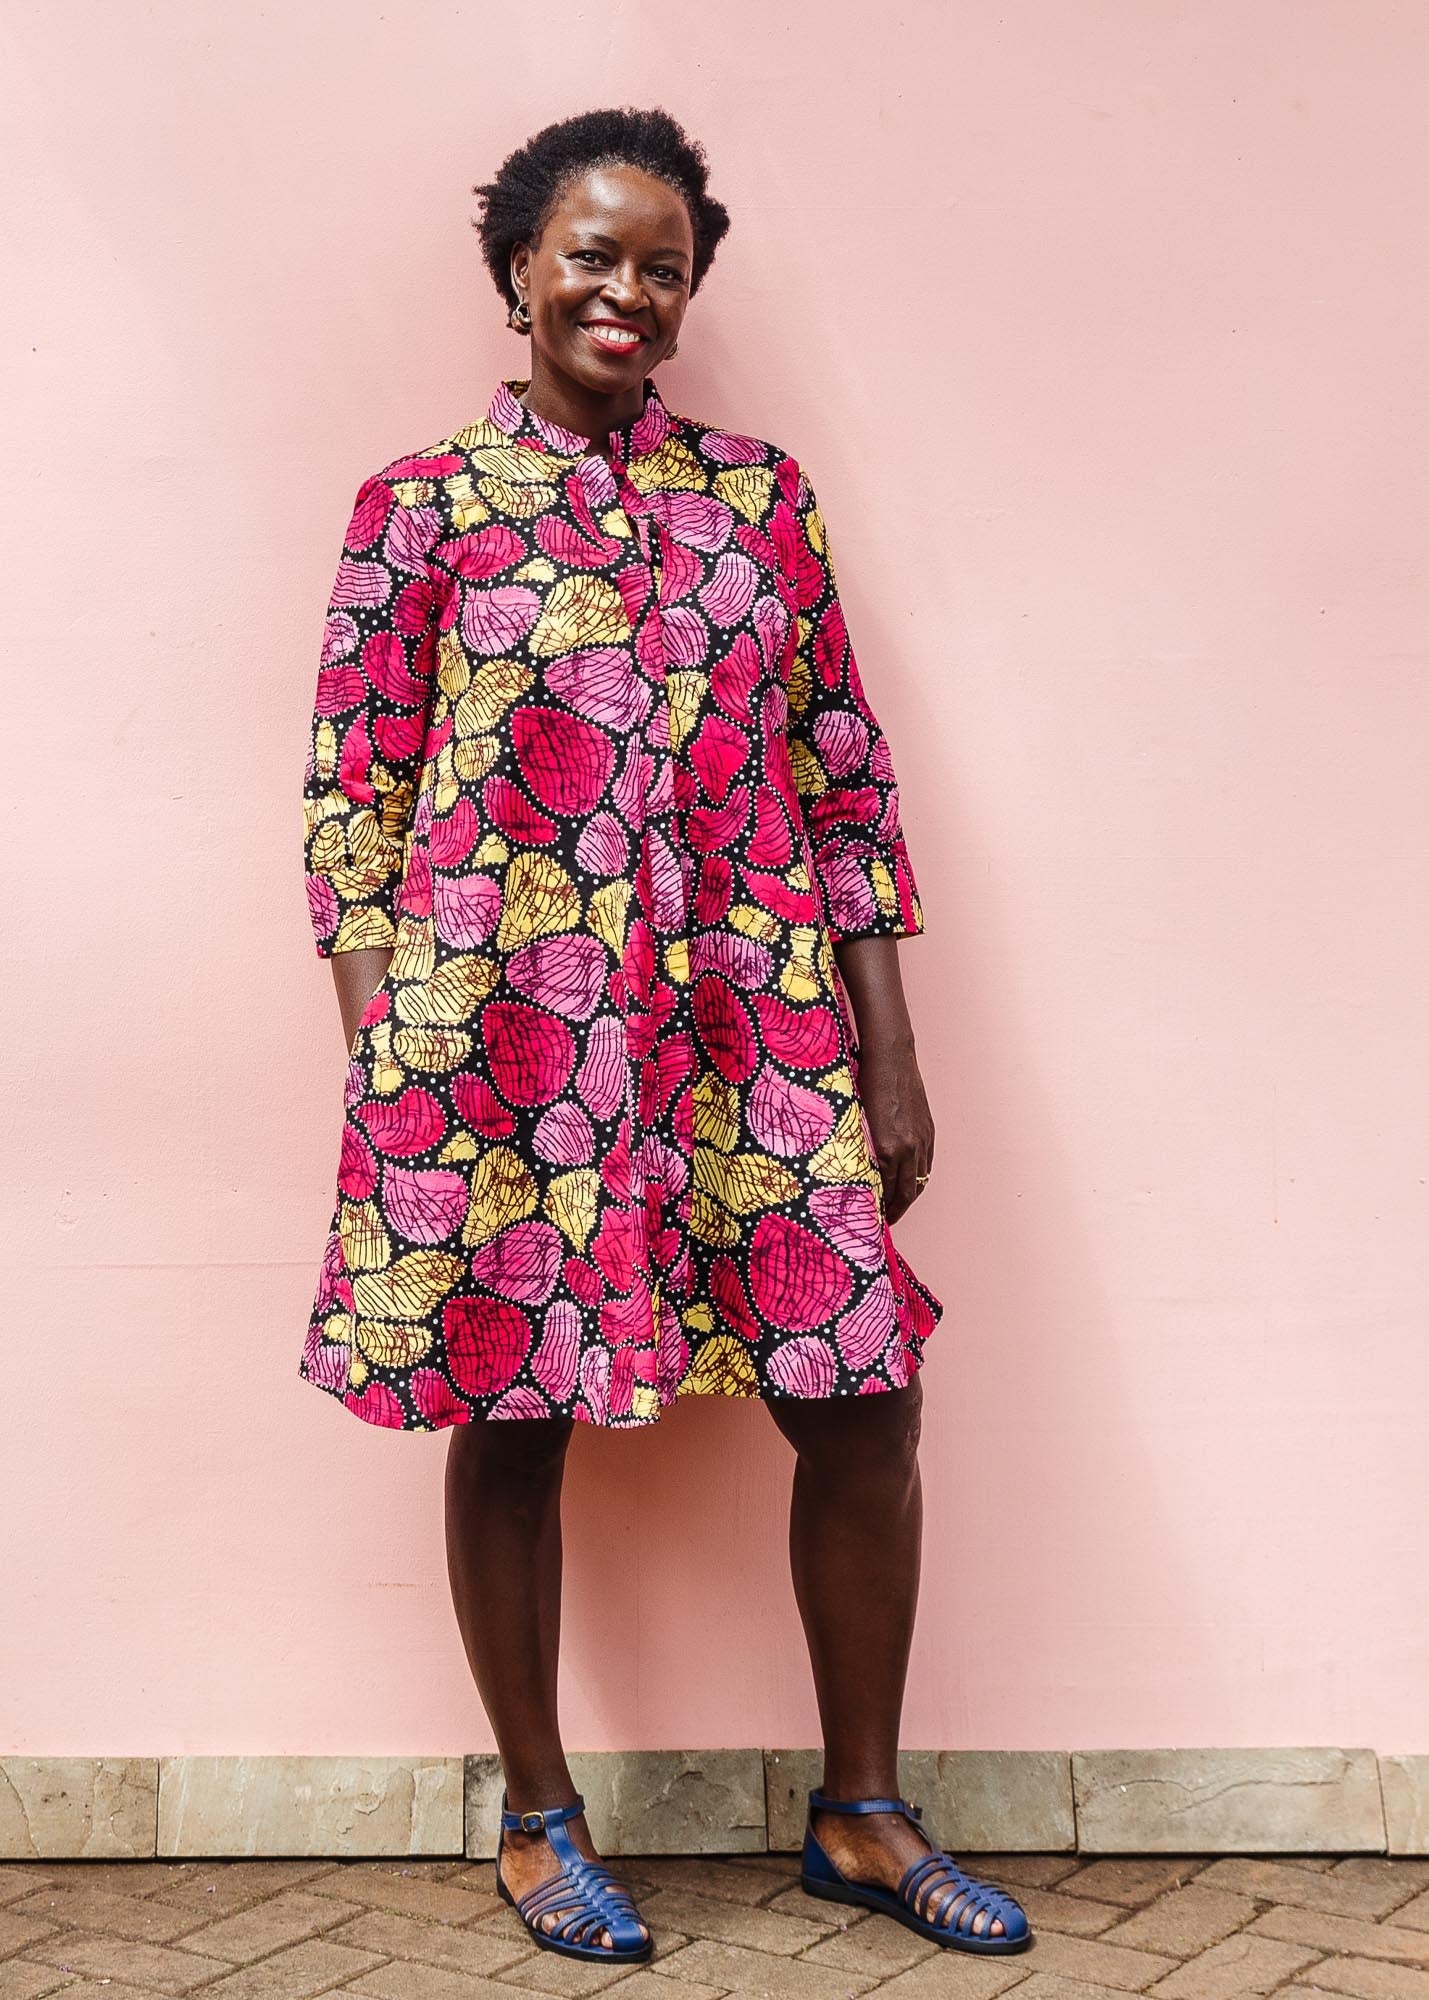 The model is wearing black, white, yellow, brown, pink, hot pink and purple bubble print dress